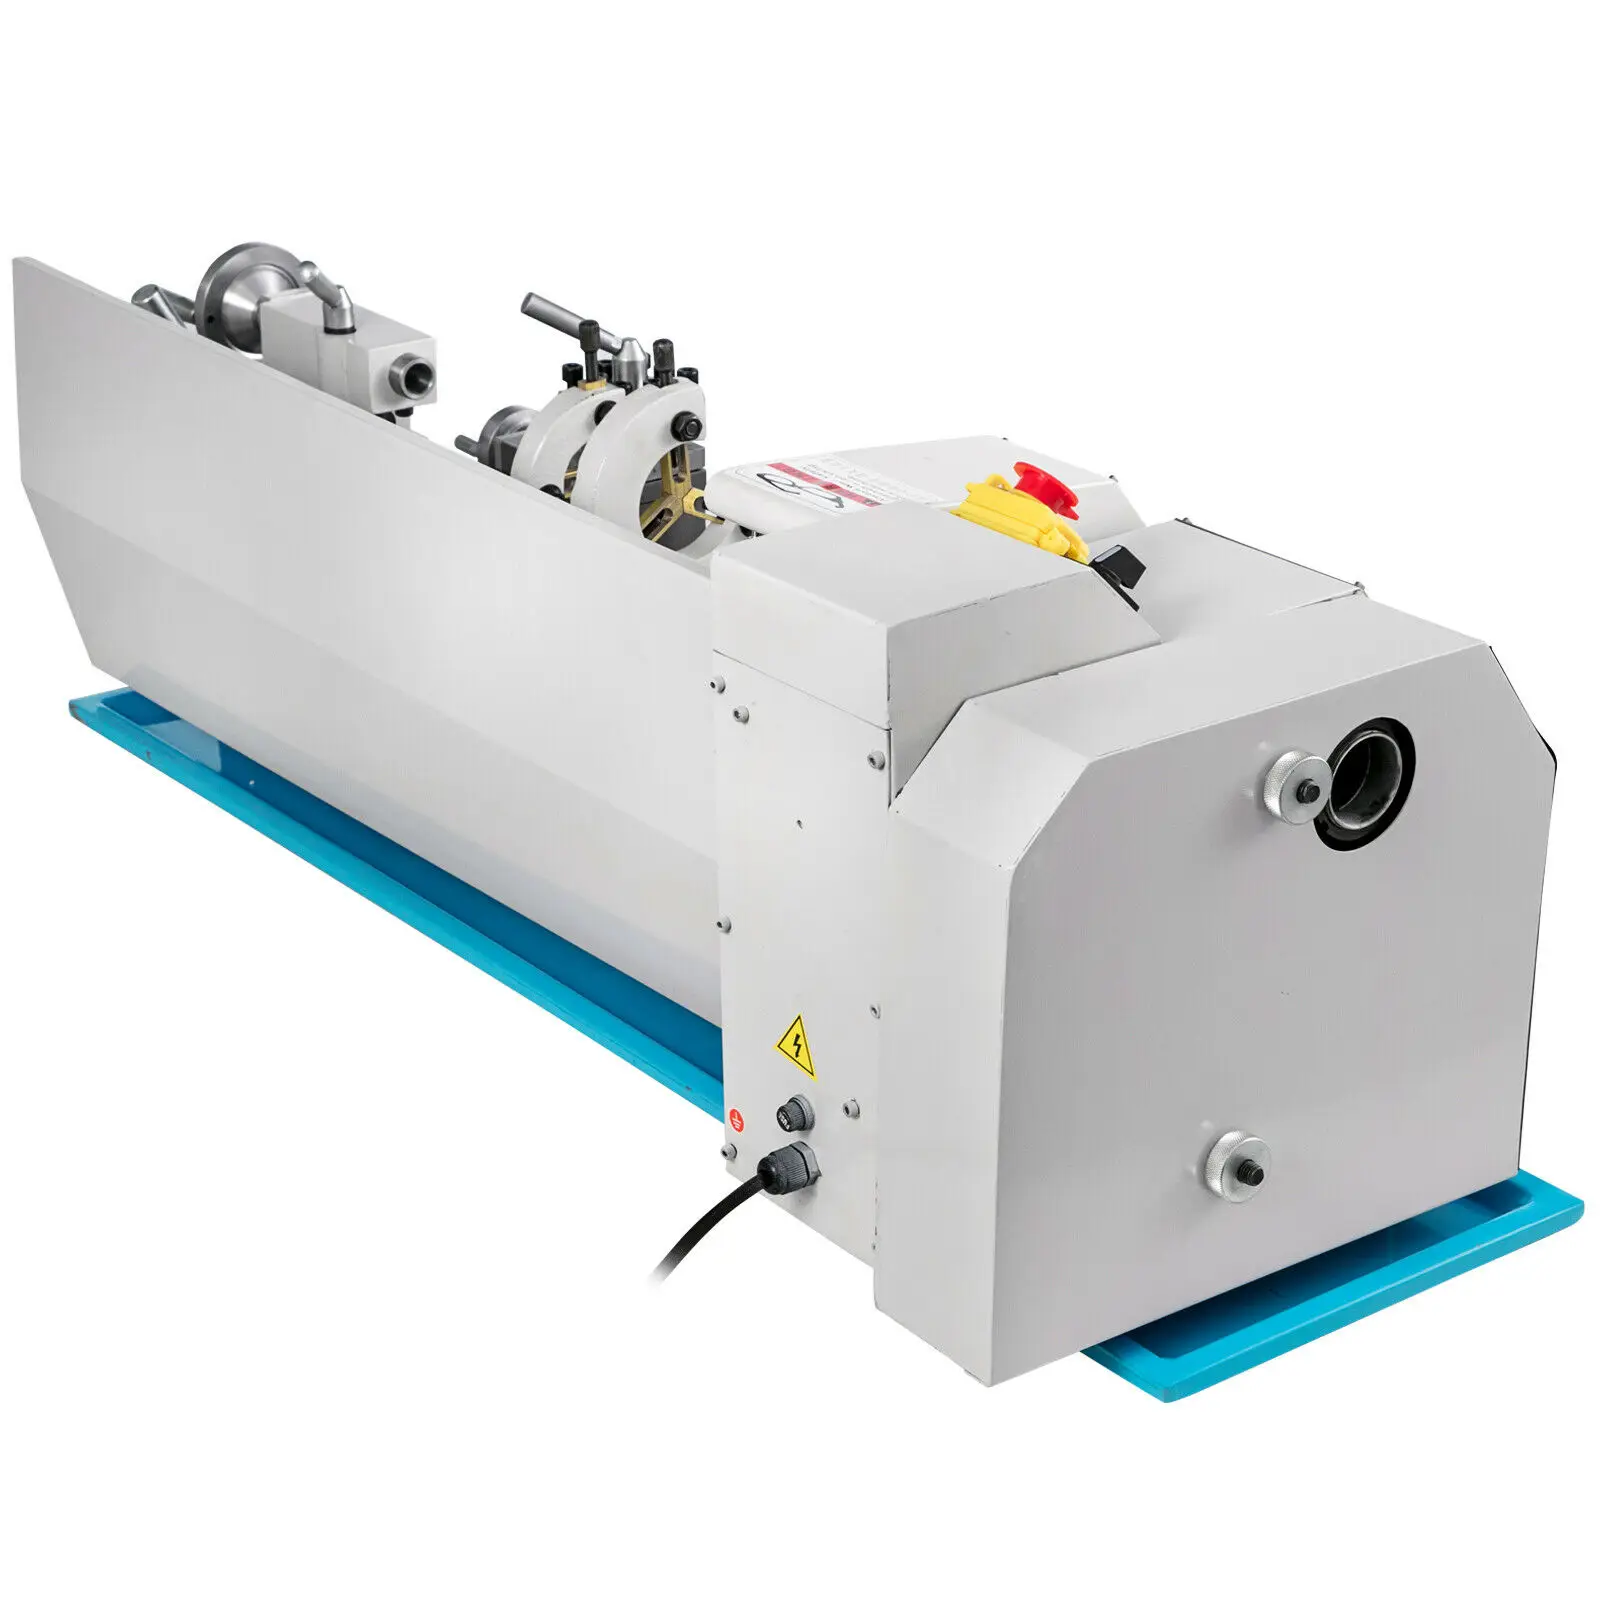 Metal Lathe 1100W Spindle 38mm Chuck Blushless motor Infinitely Variable Speed 200X600 with LED Screen and Tools | Инструменты